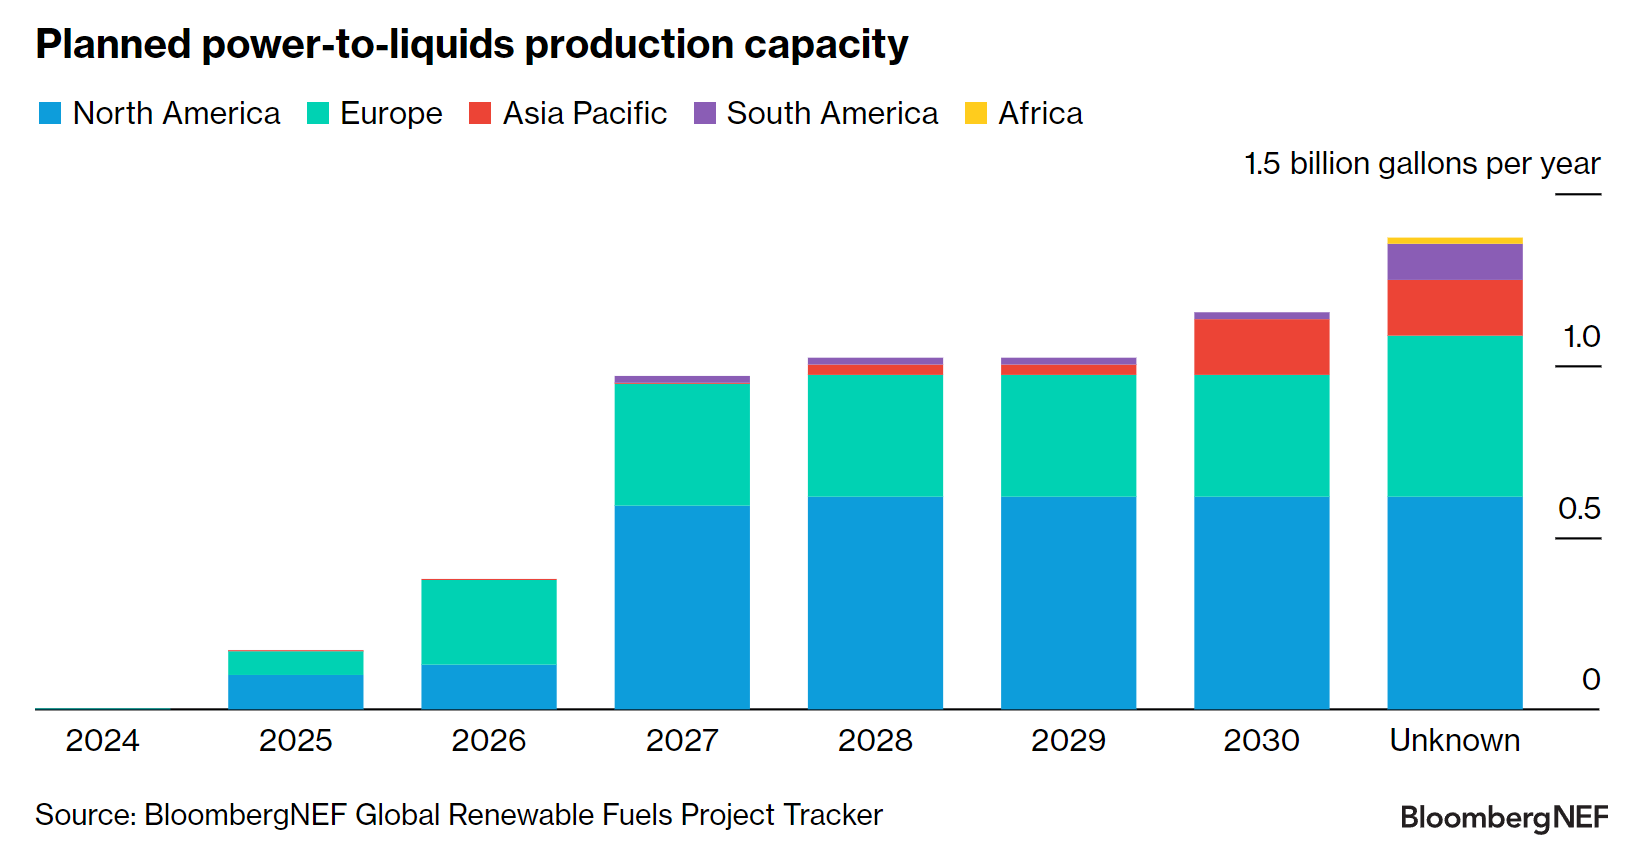 Planned power-to-liquids production capacity through 2030